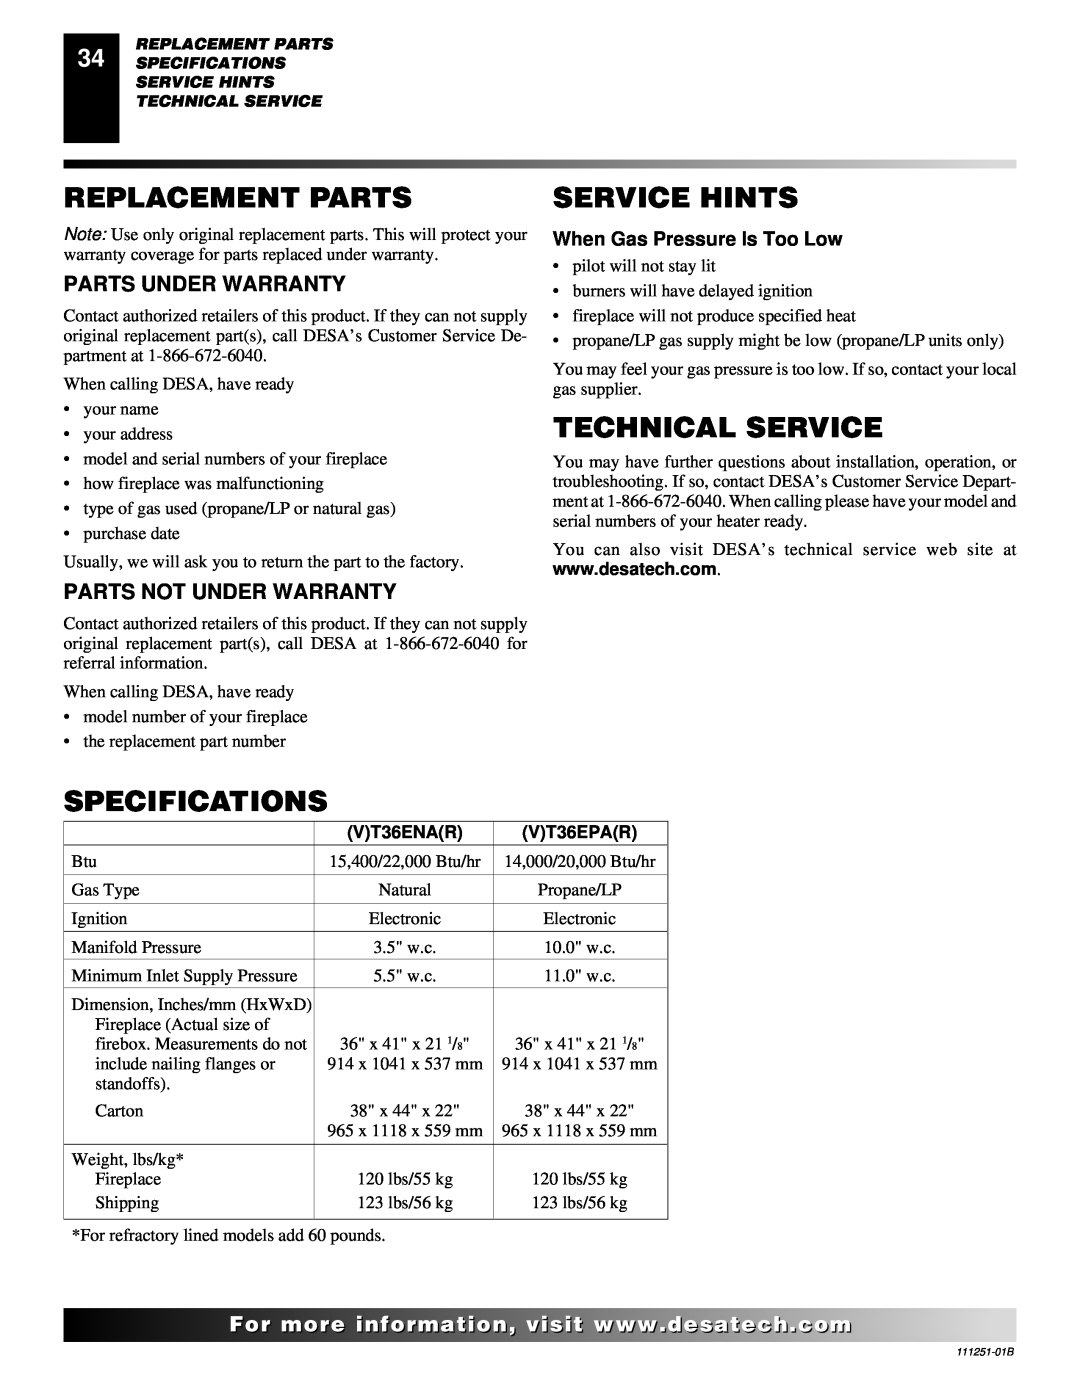 Desa (V)T36ENA Replacement Parts, Service Hints, Technical Service, Specifications, When Gas Pressure Is Too Low 